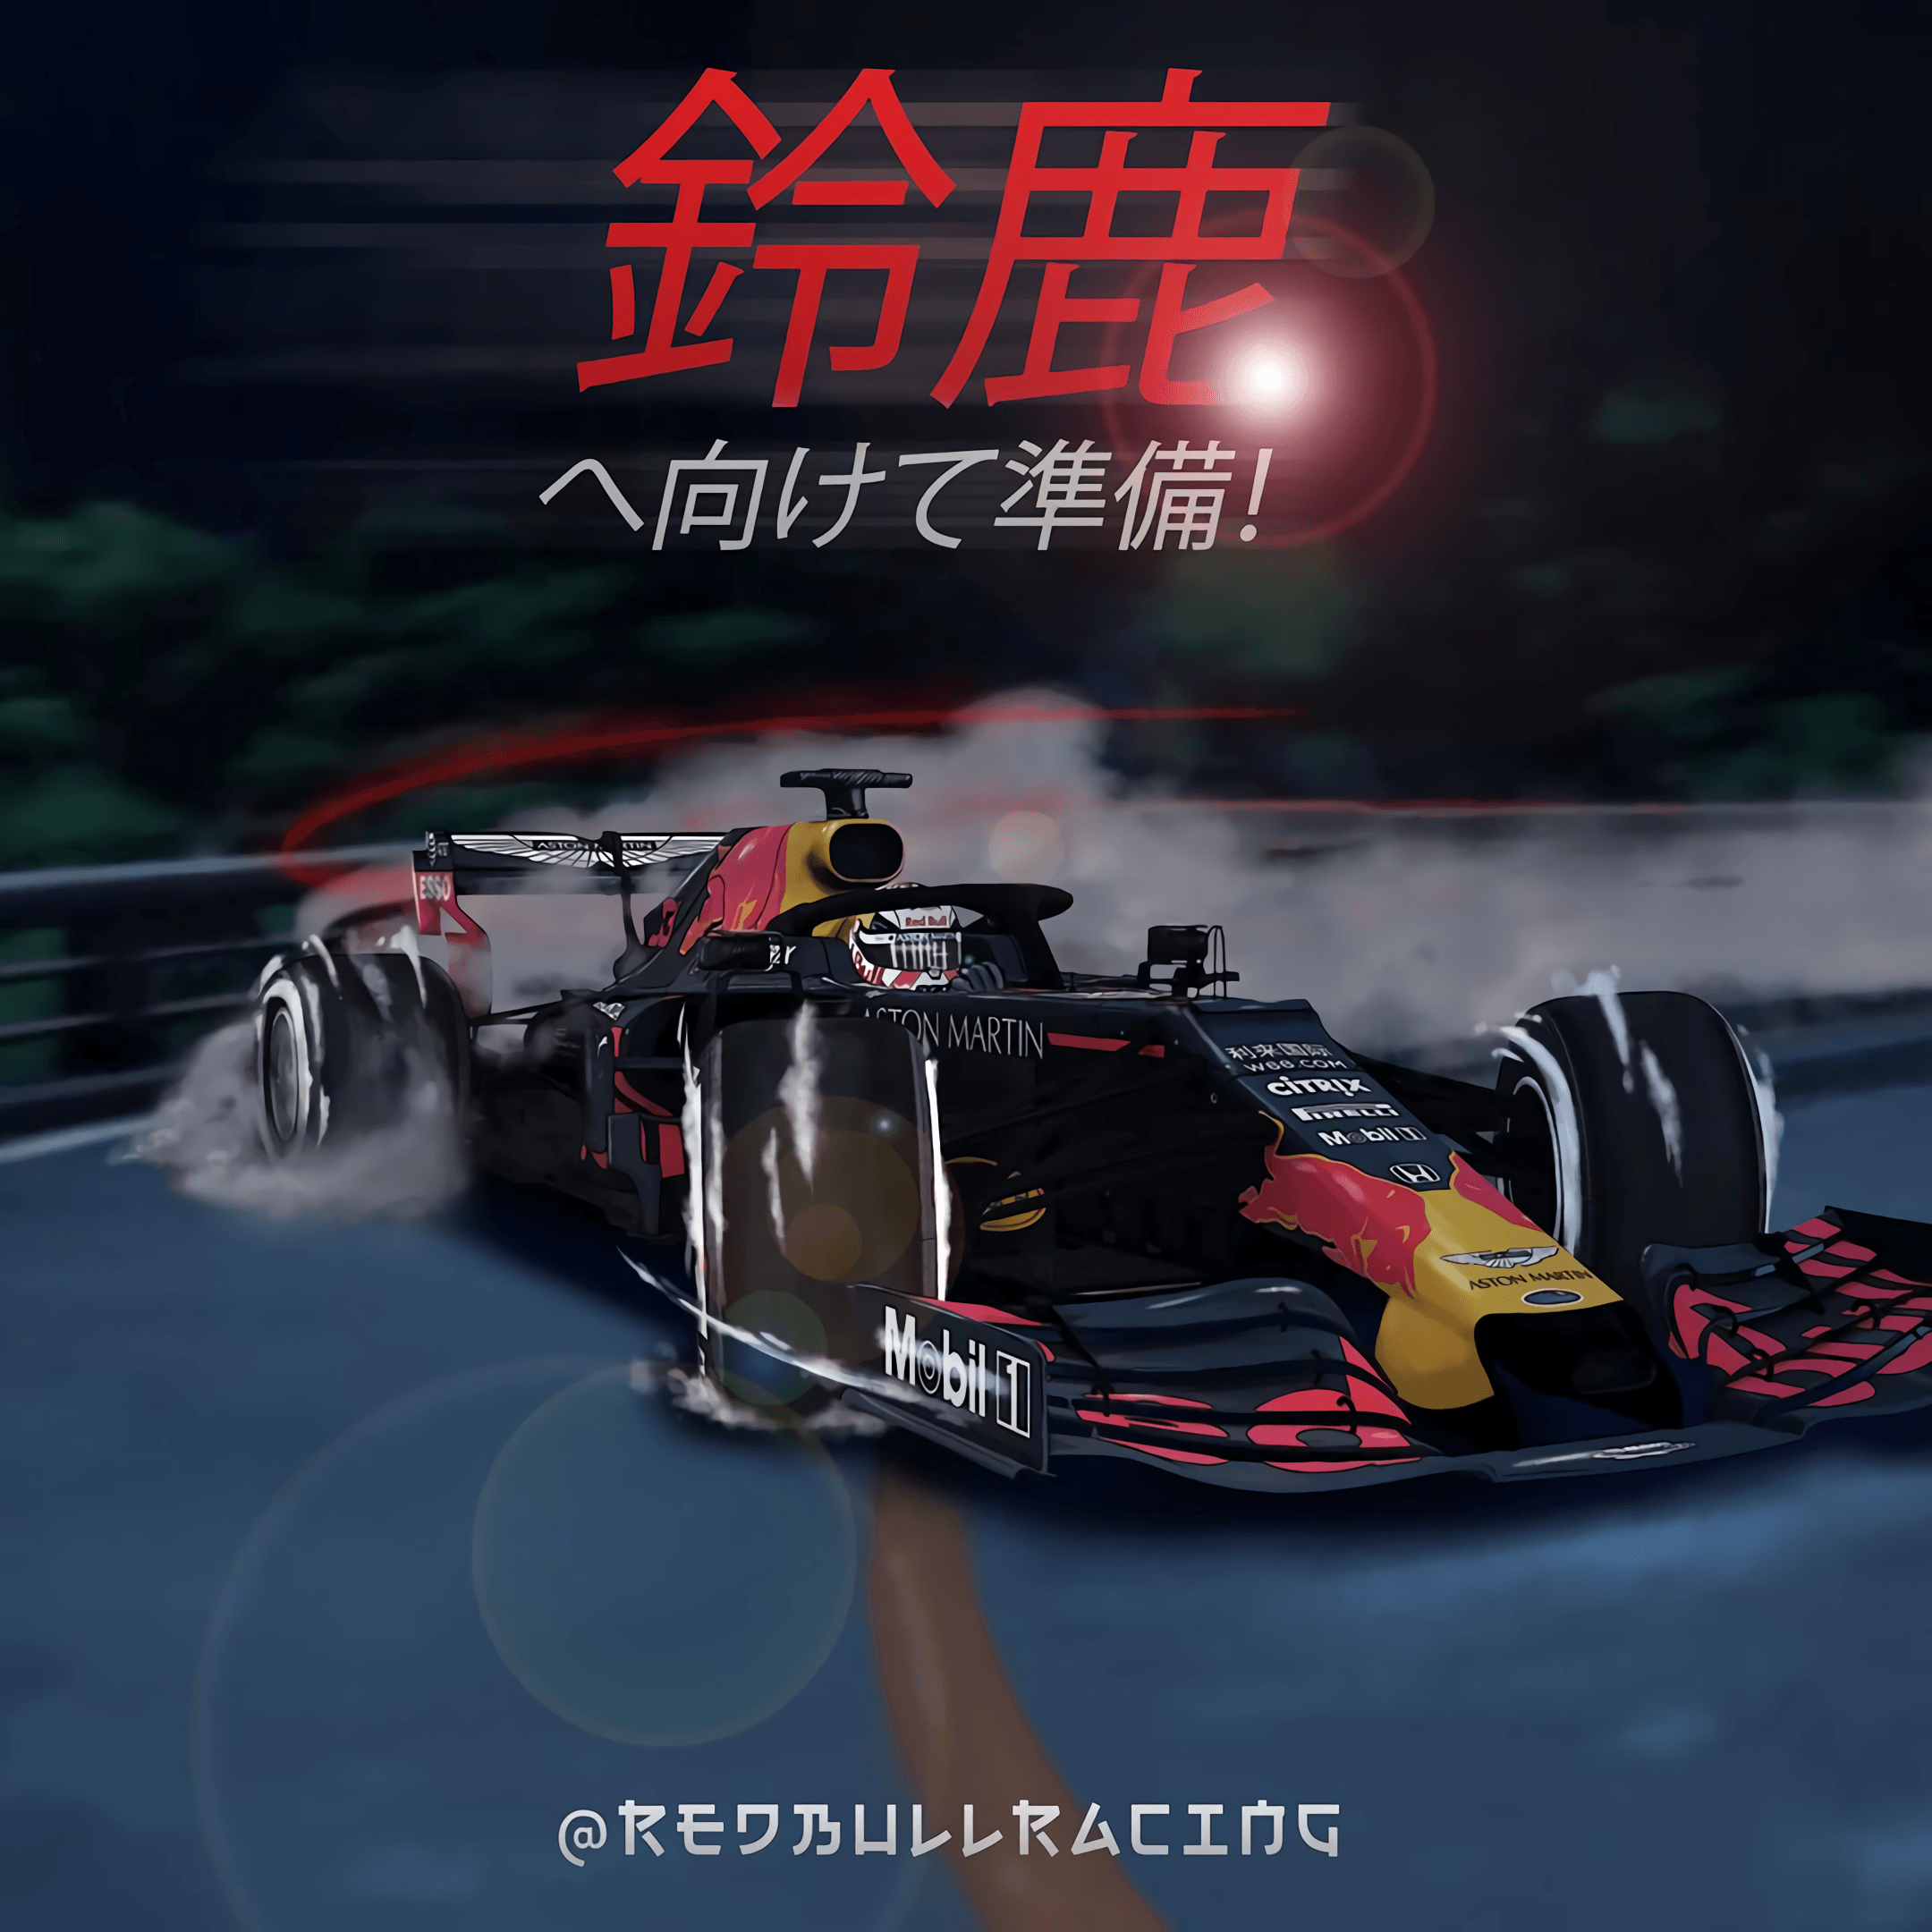 Cleaned up and upscaled the Red Bull Racing wallpaper